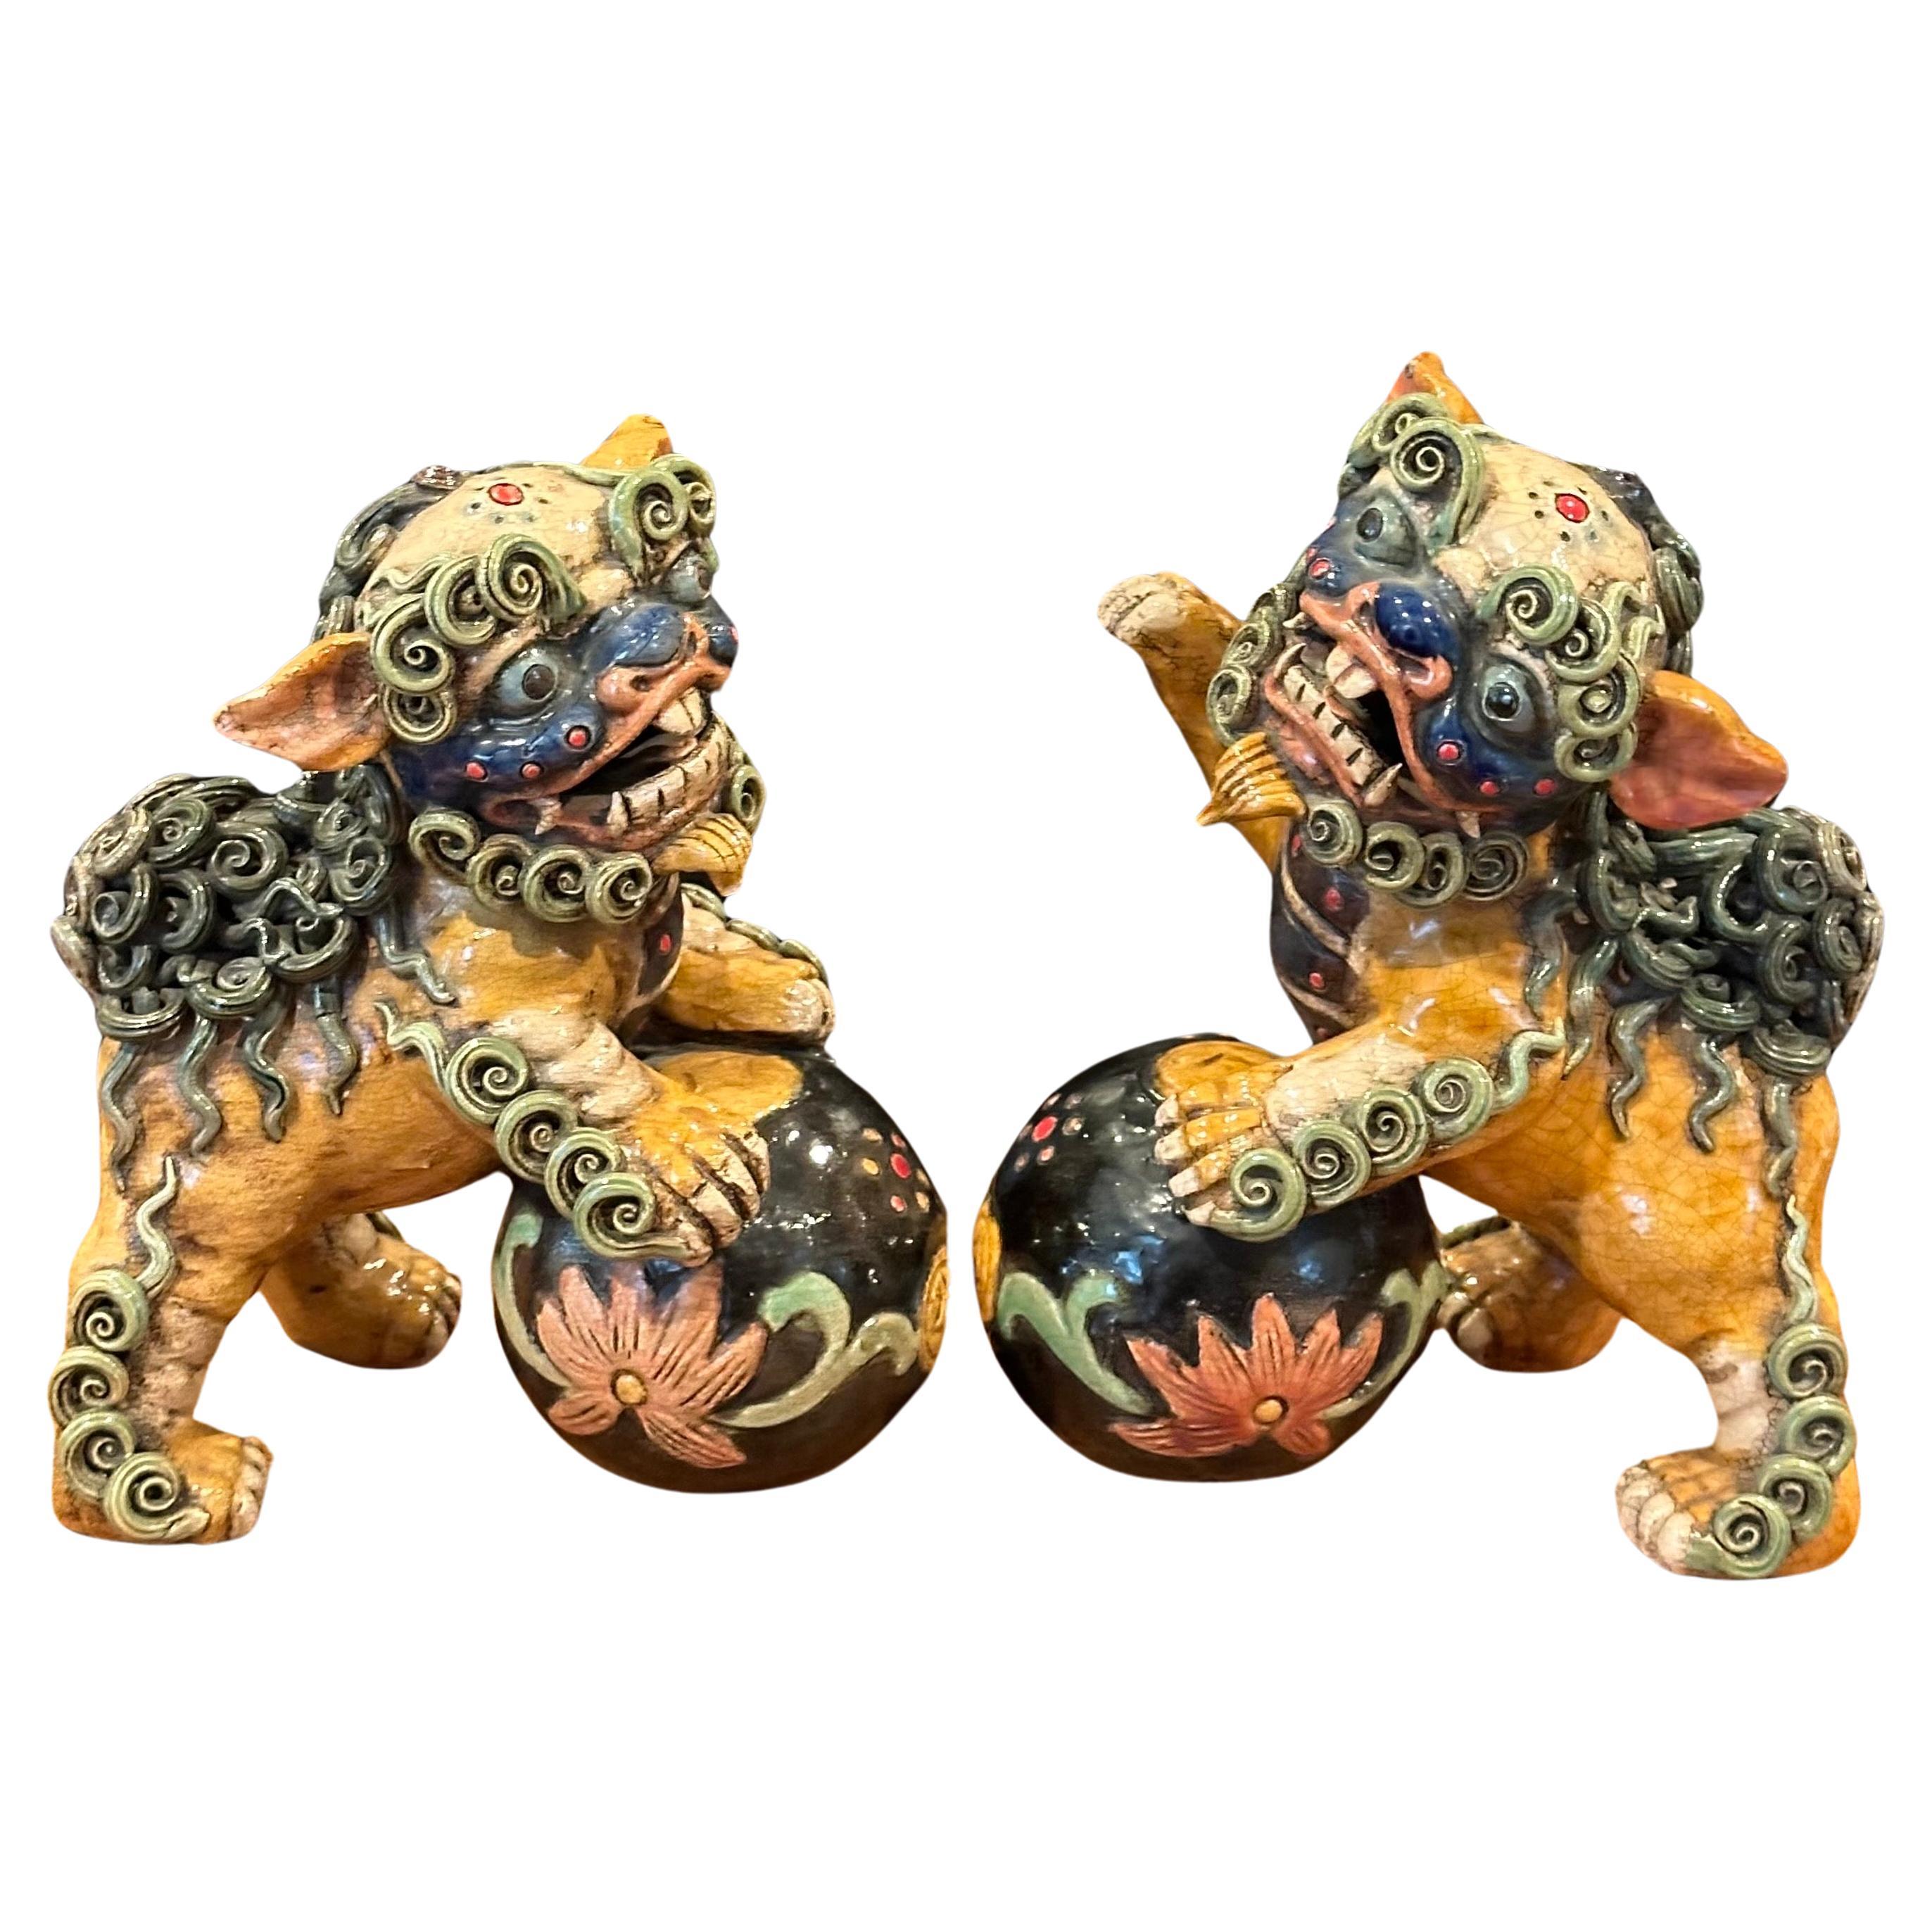 Great pair of mid-century polychrome glazed ceramic foo dogs from China, circa 1950s. Great detail and a beautiful color combination of yellow, green and brown; the pair measure 14